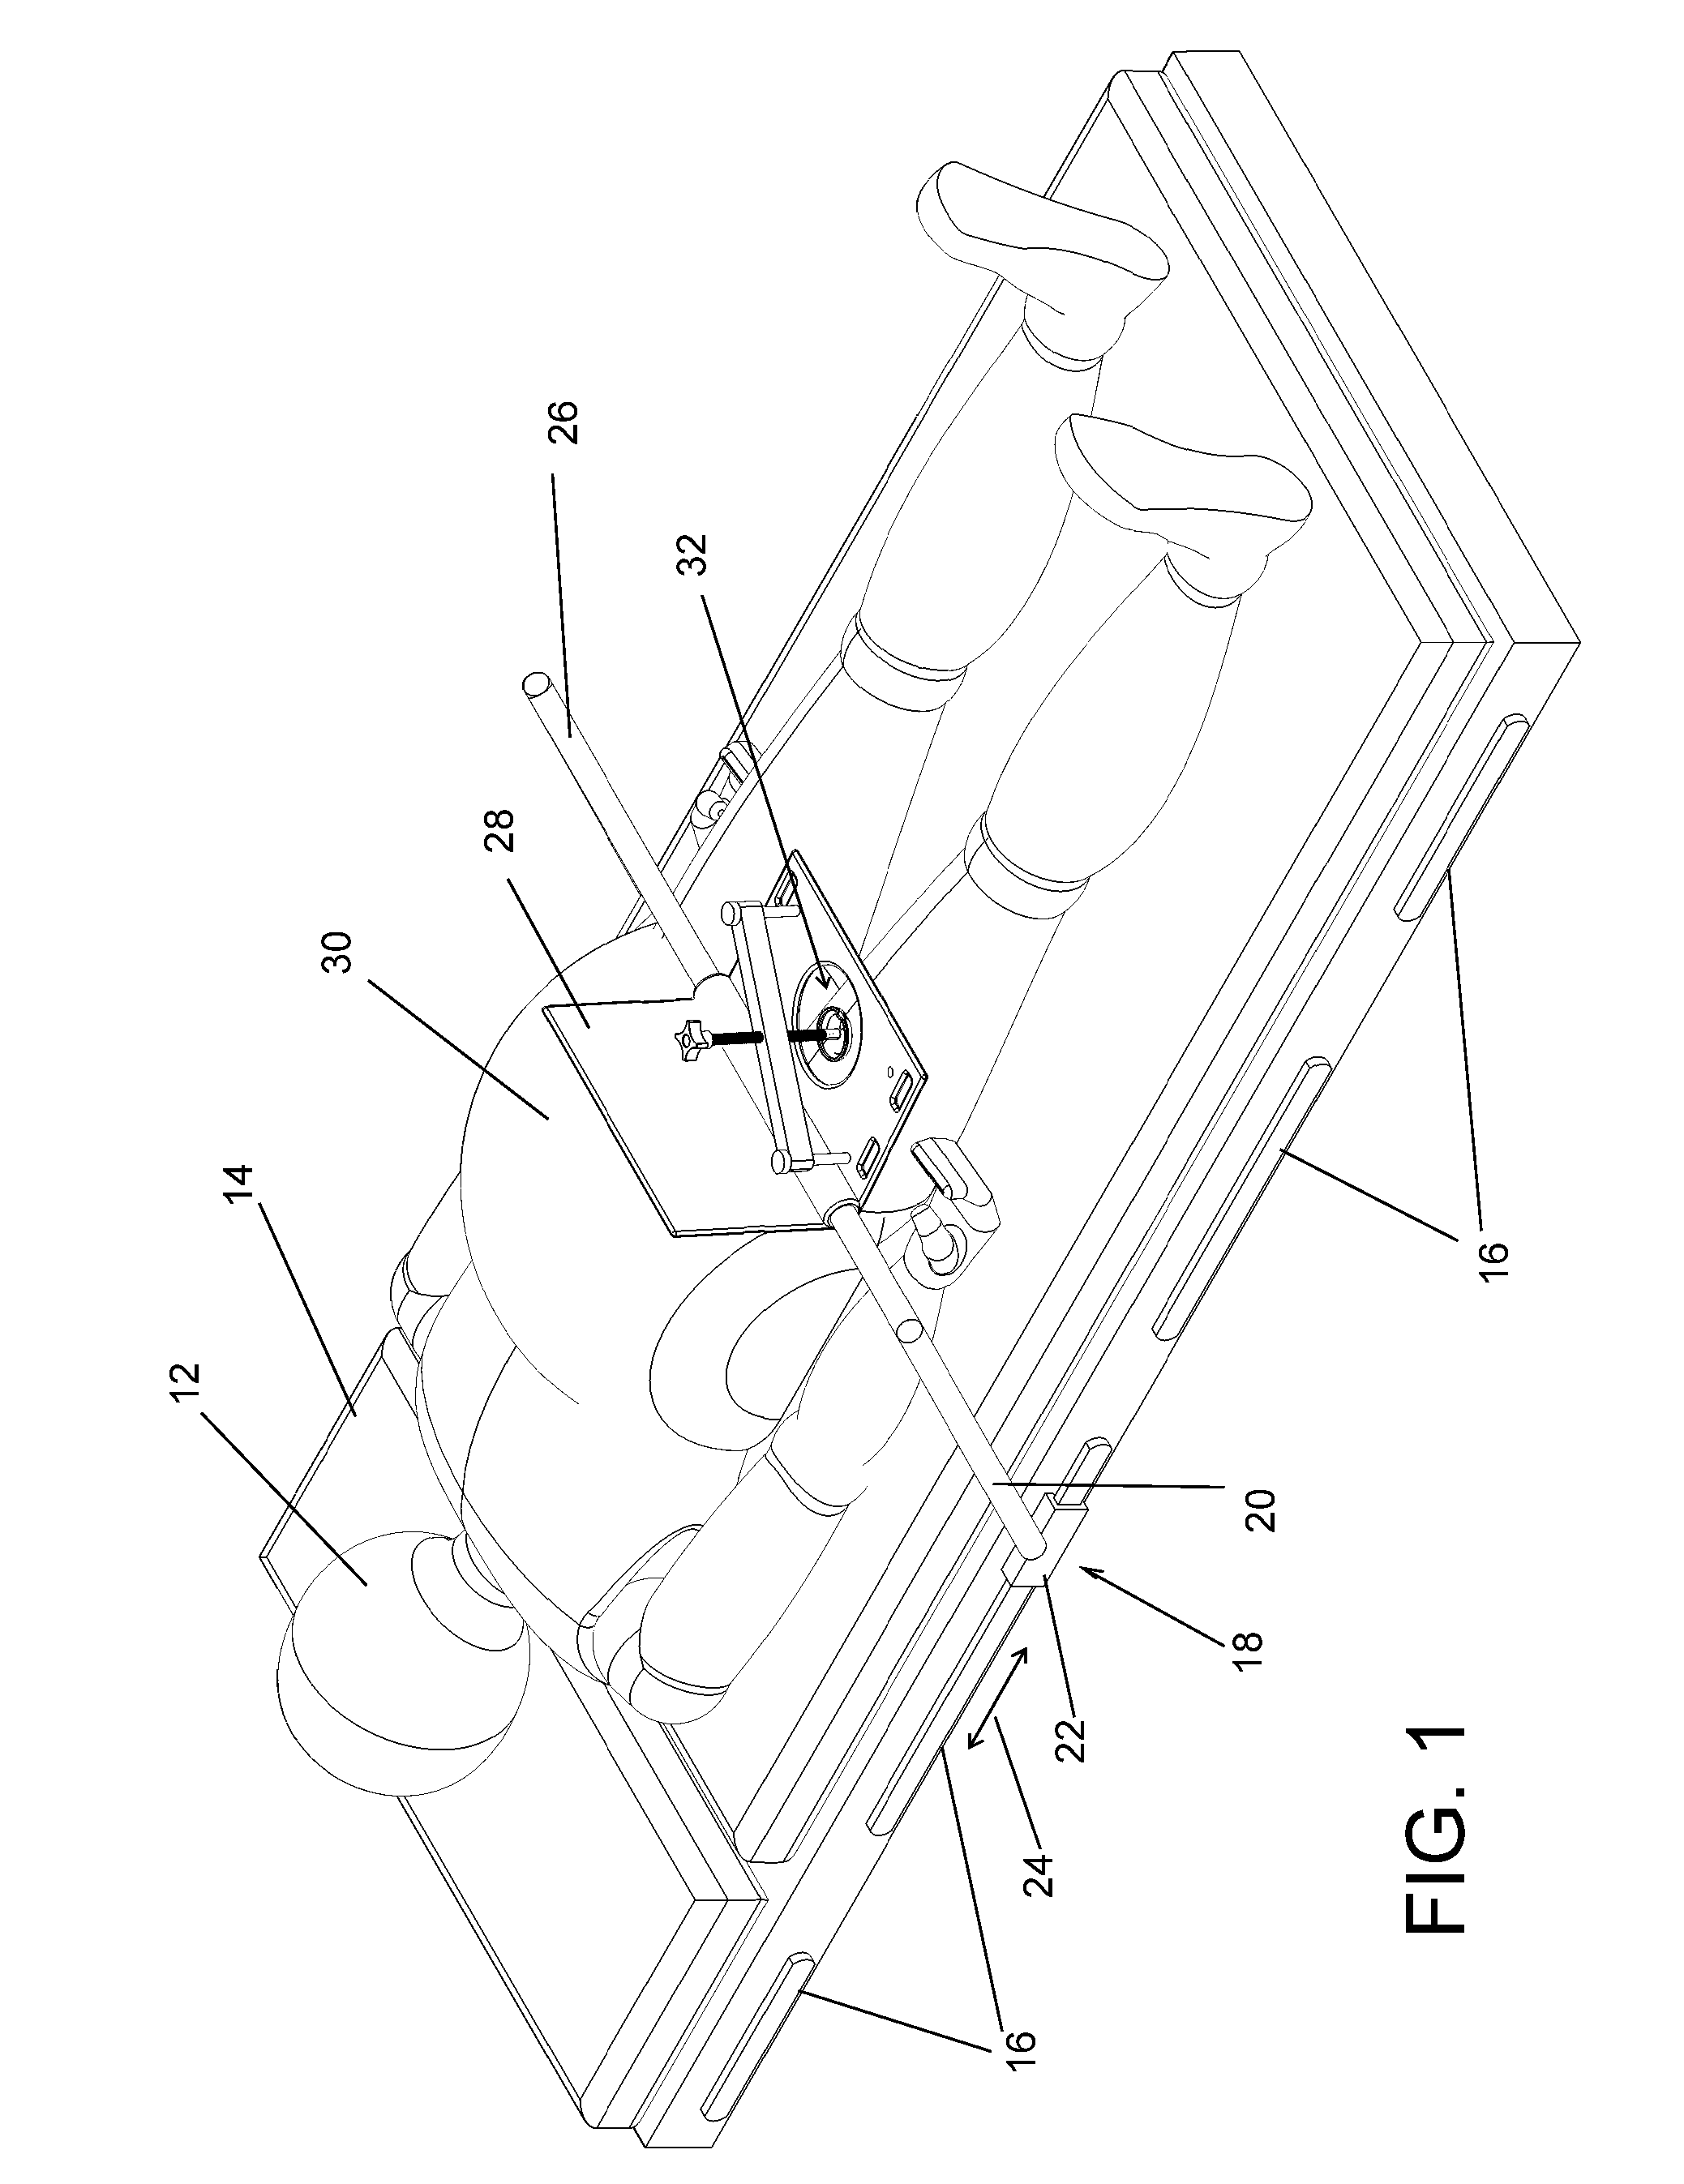 Method and apparatus for retraction of pannus